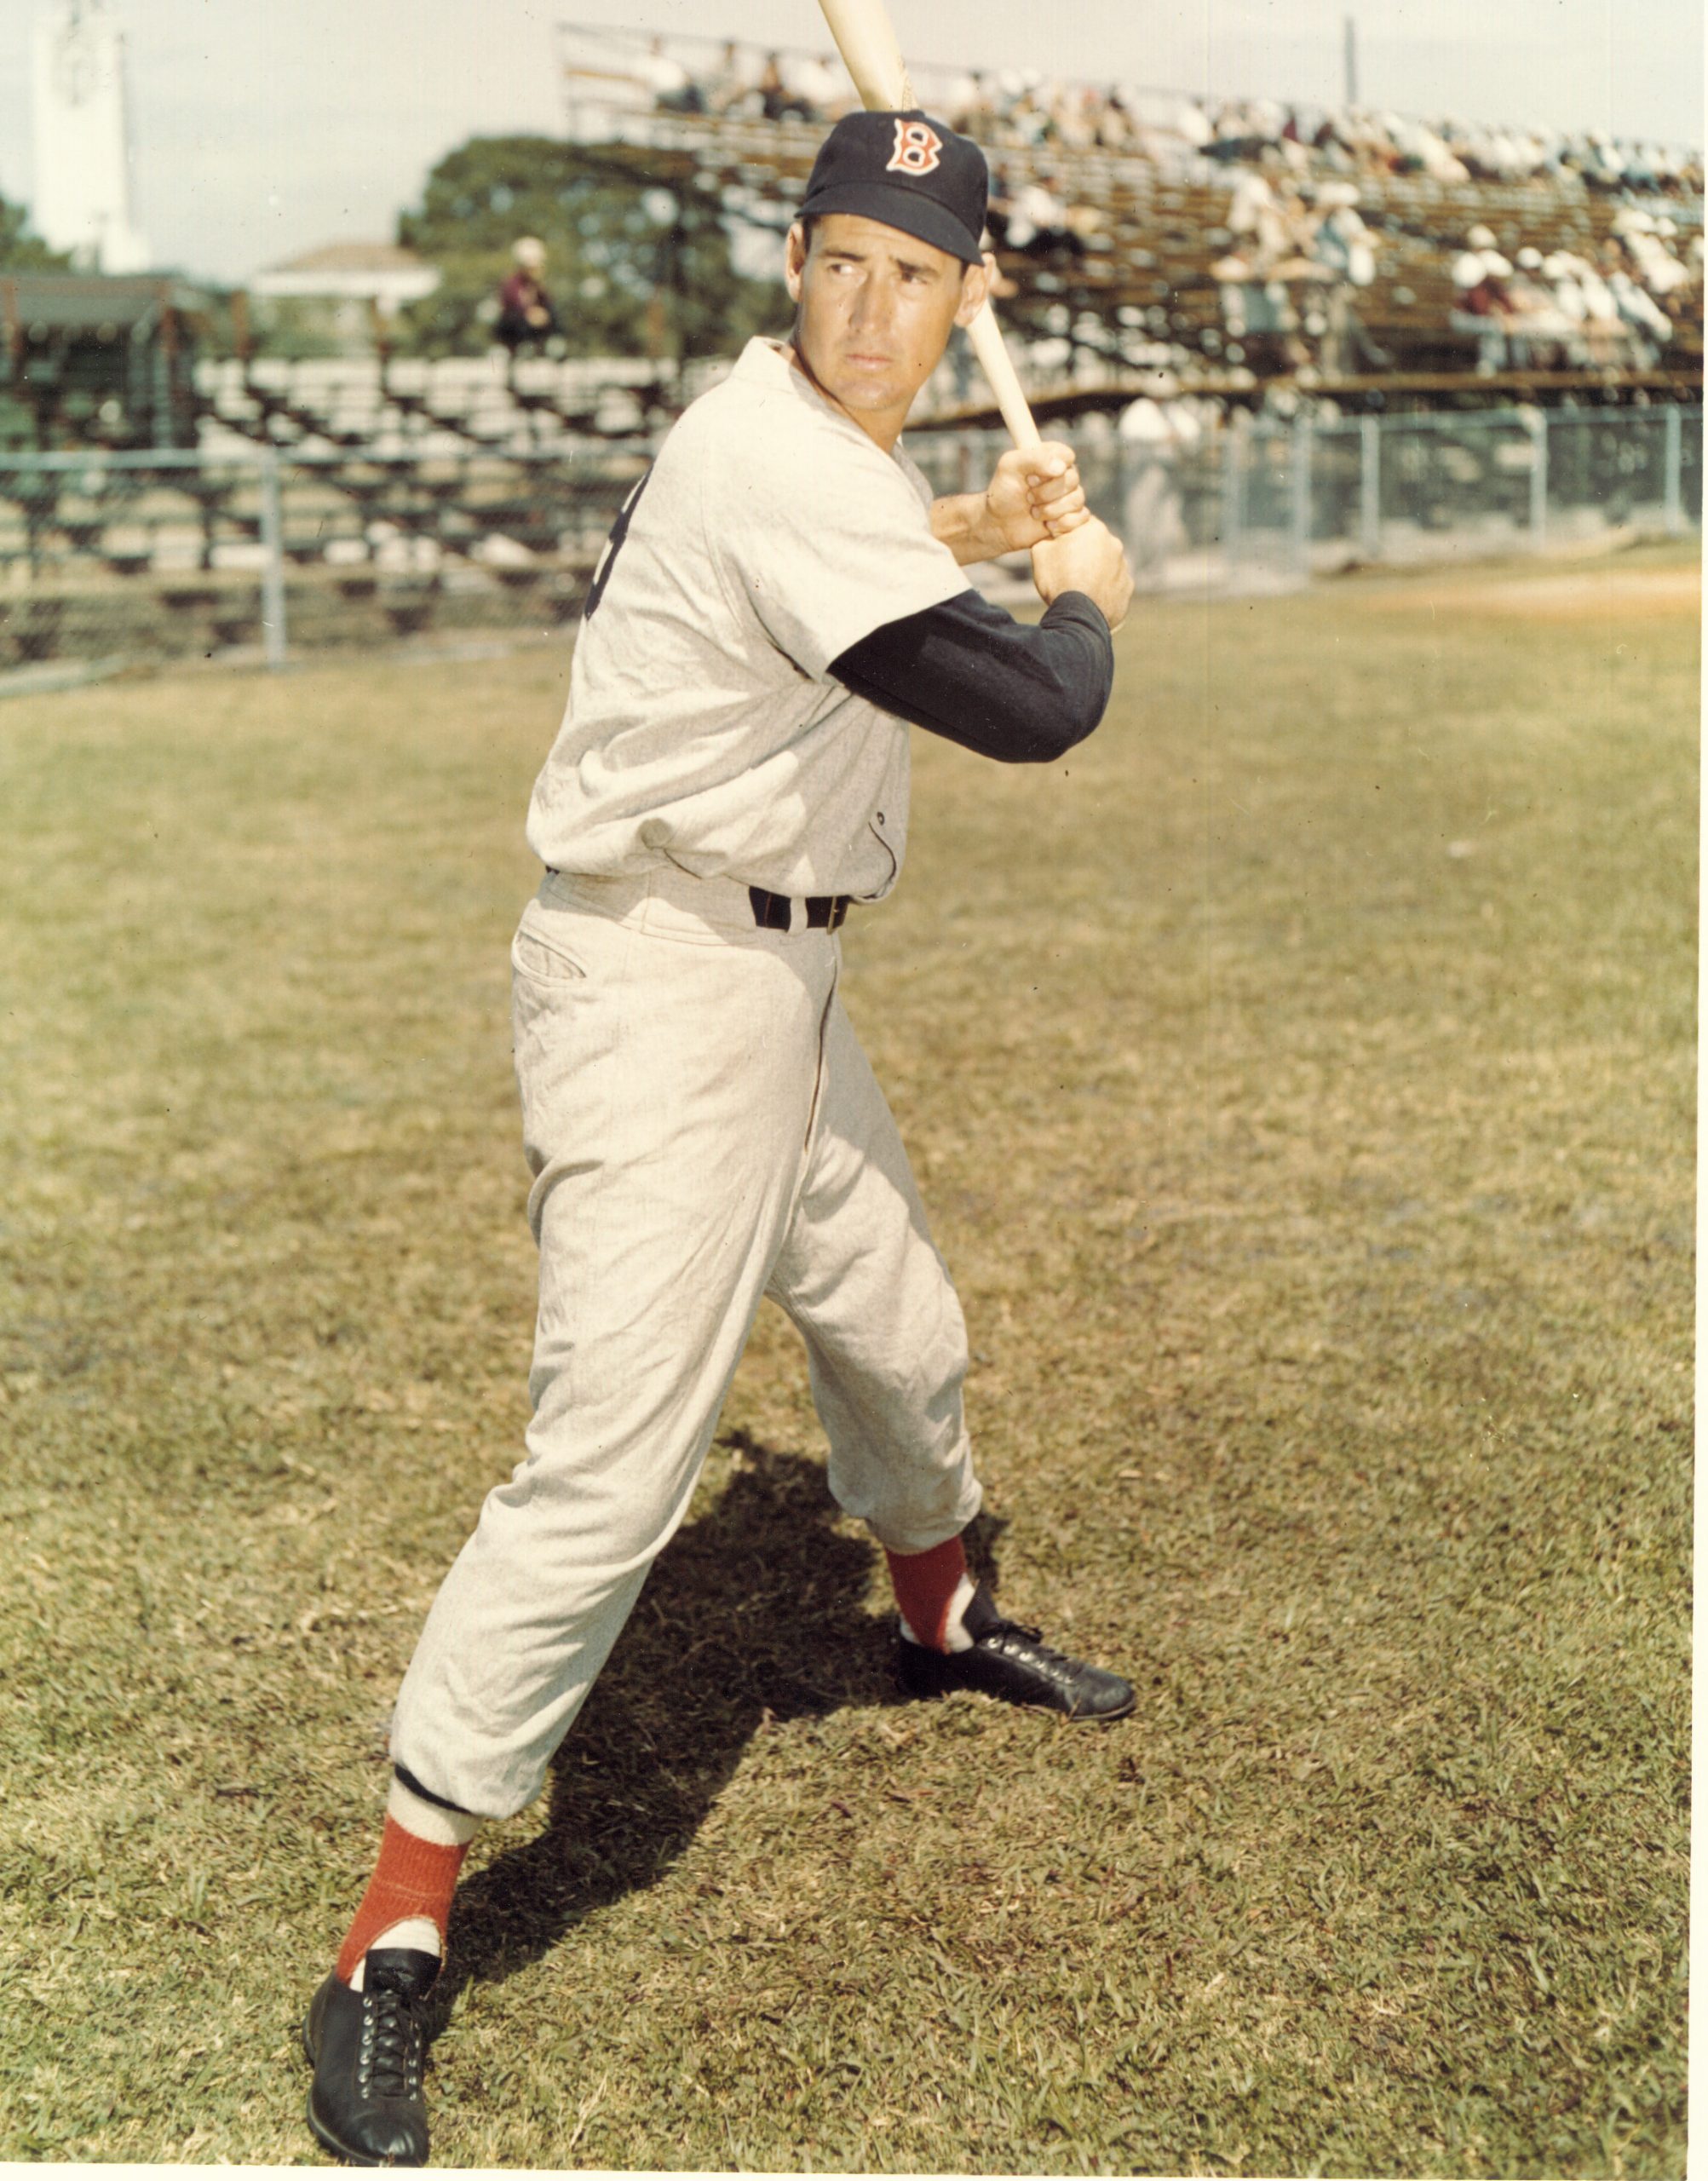 When nineteen-year-old Ted Williams arrived at his first spring training ca...